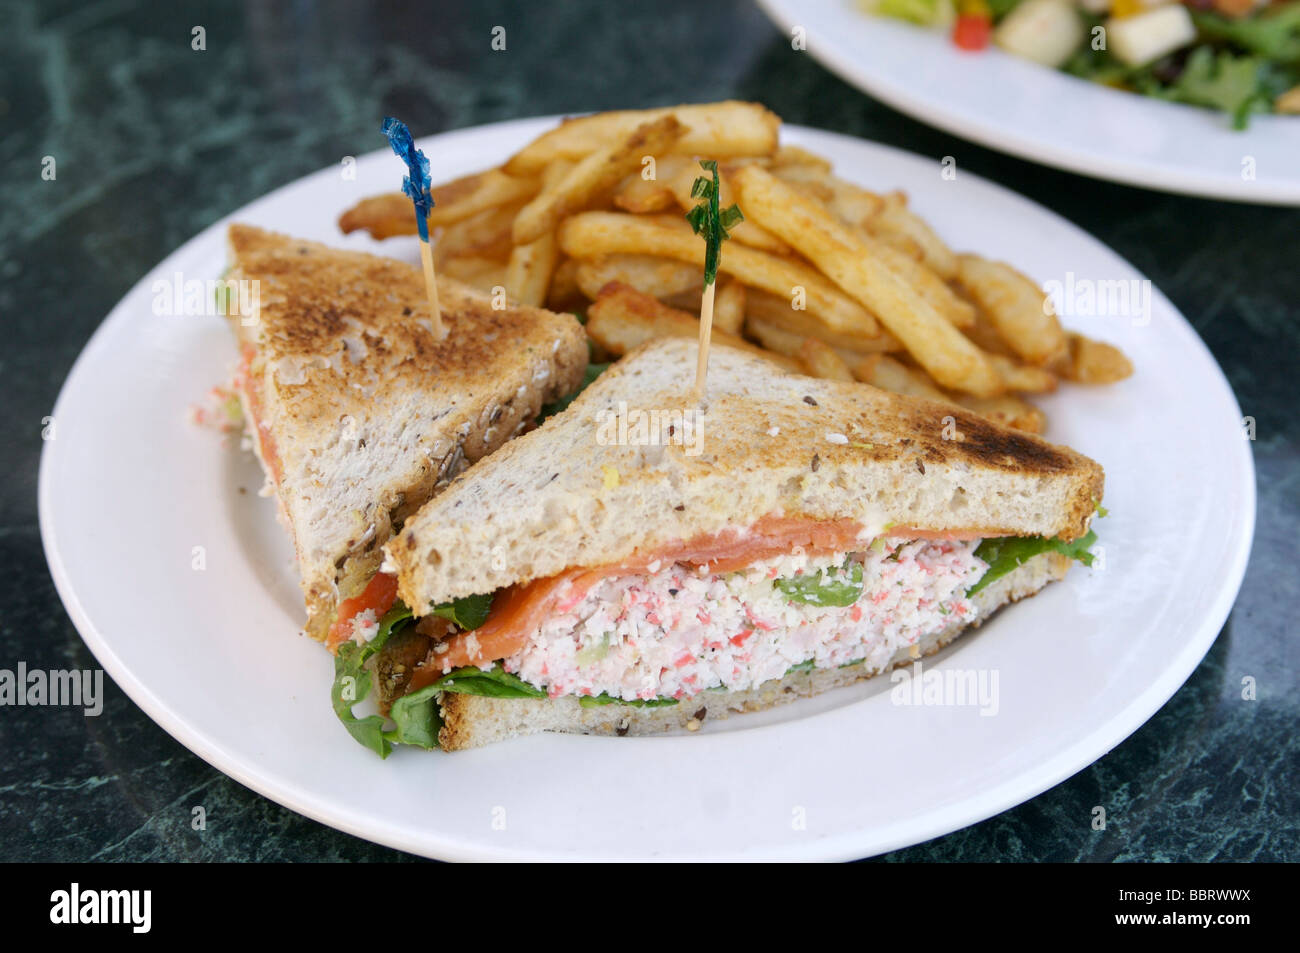 Grilled_crab_sandwich_with_french_fries-